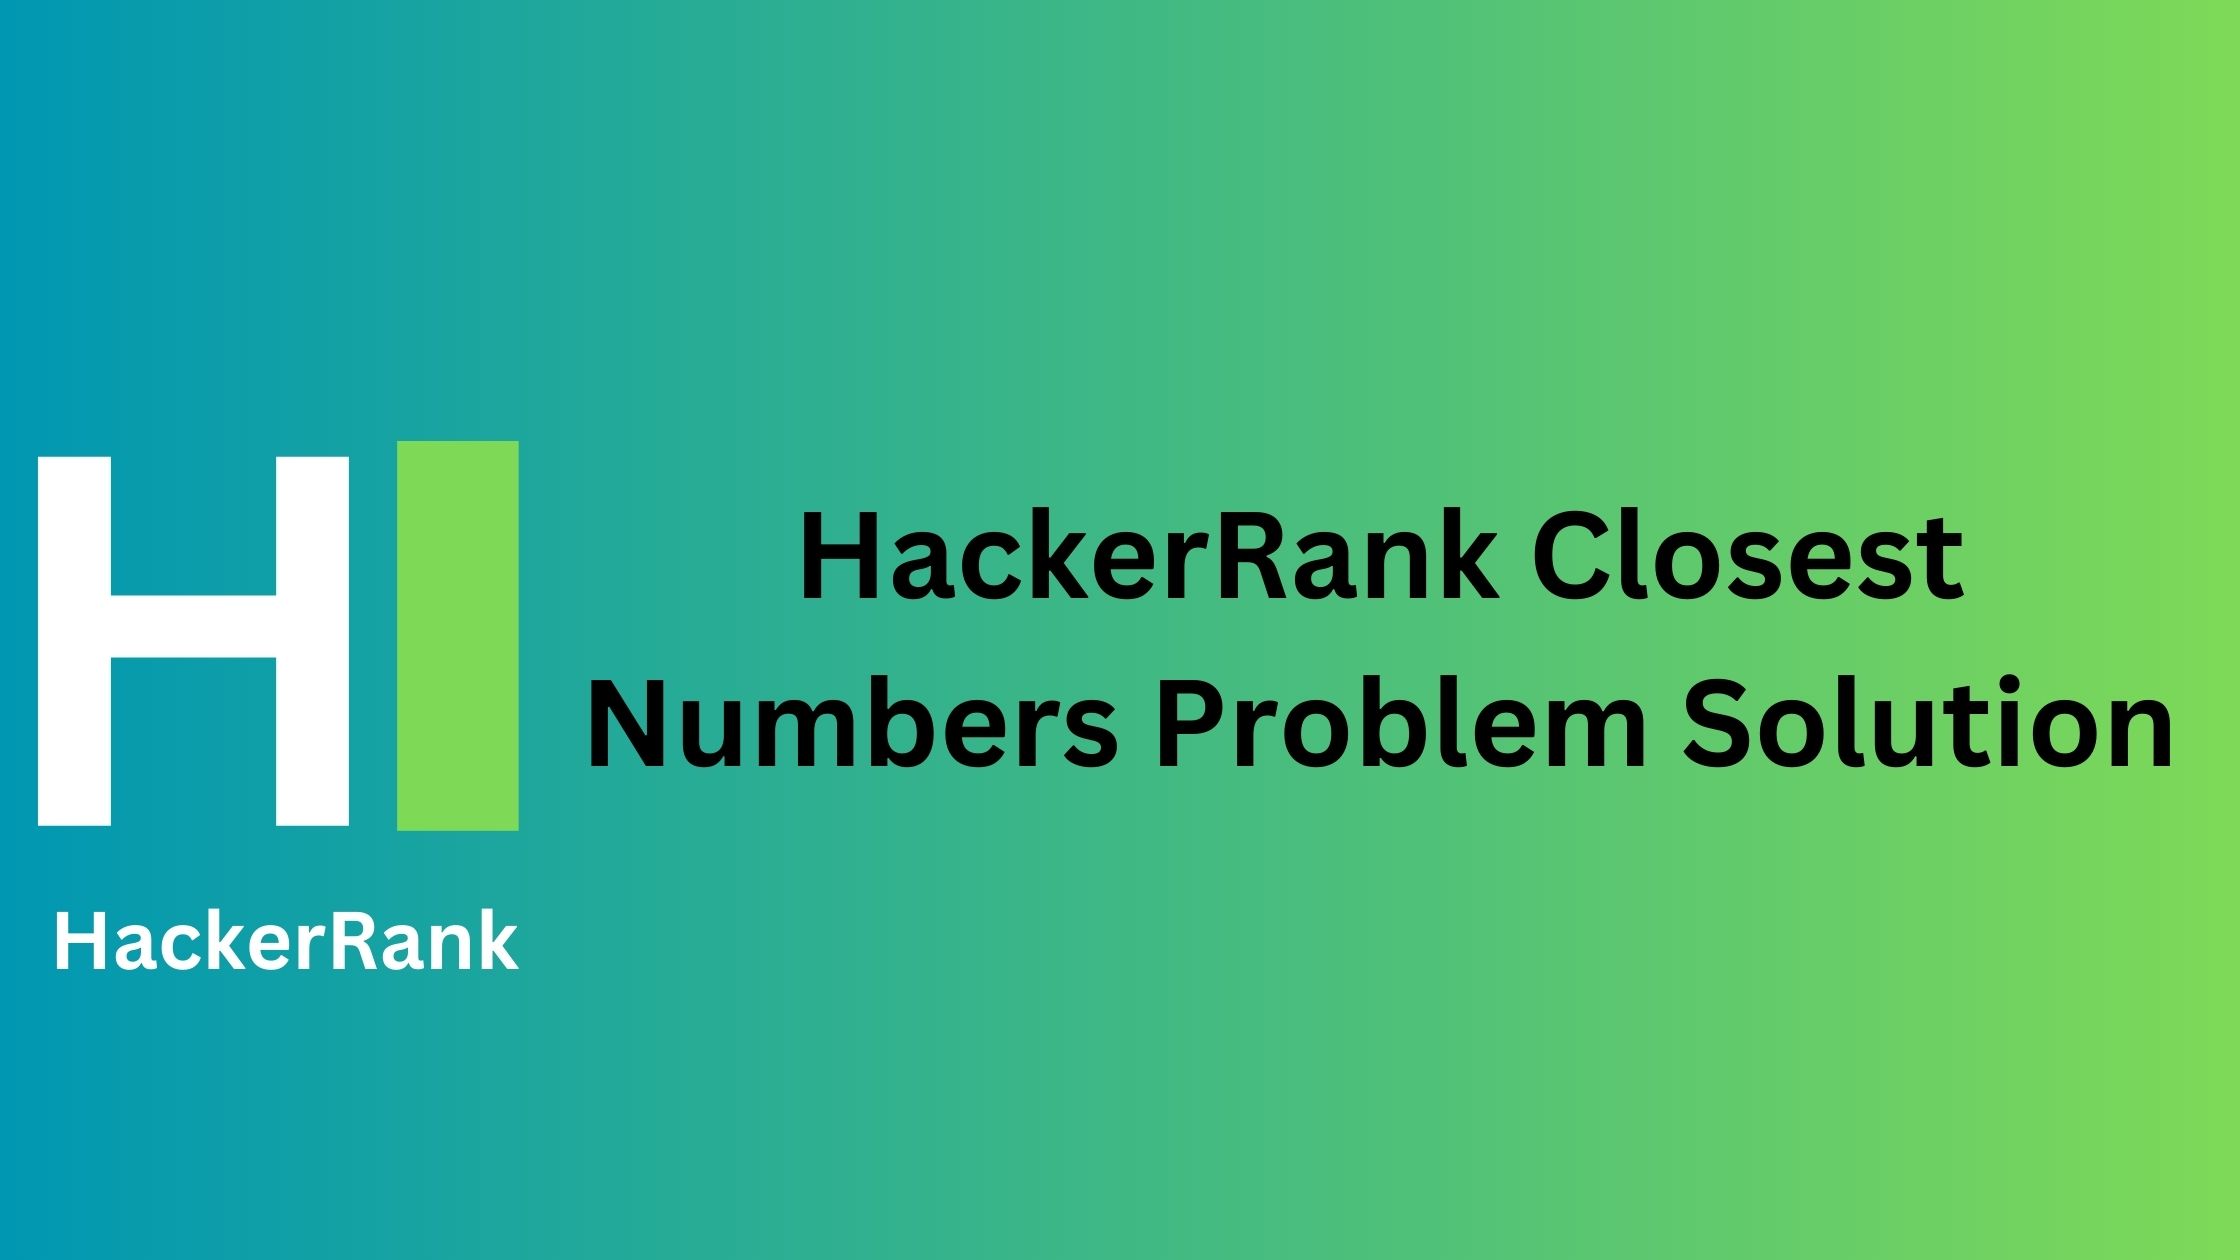 HackerRank Closest Numbers Problem Solution